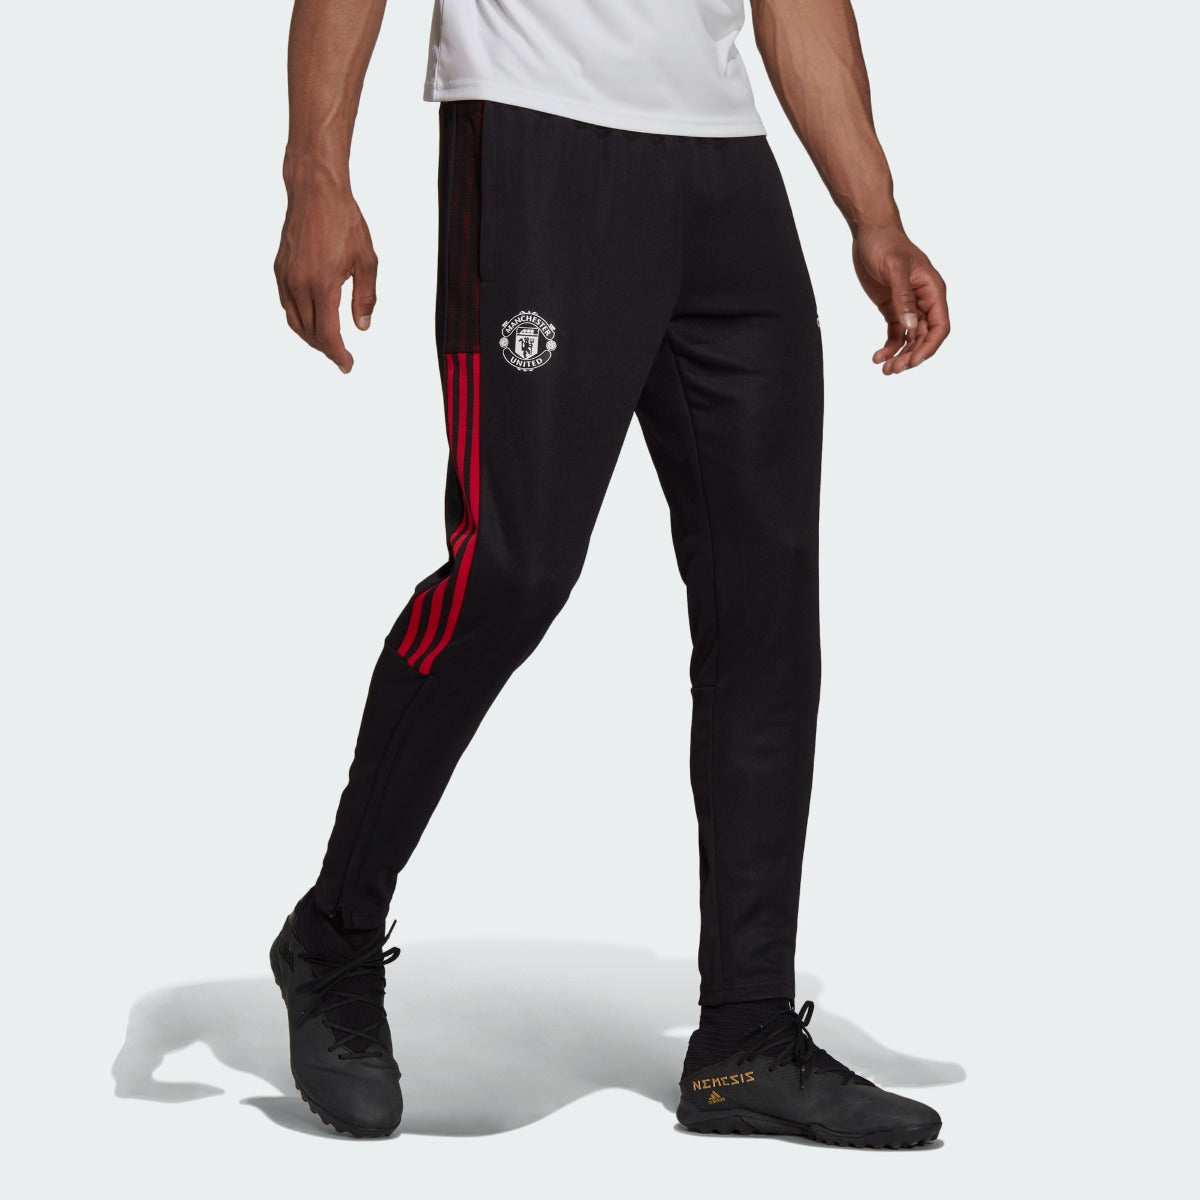 Adidas 2021-22 Manchester United Training Pants - Black-Red (Model - Front)